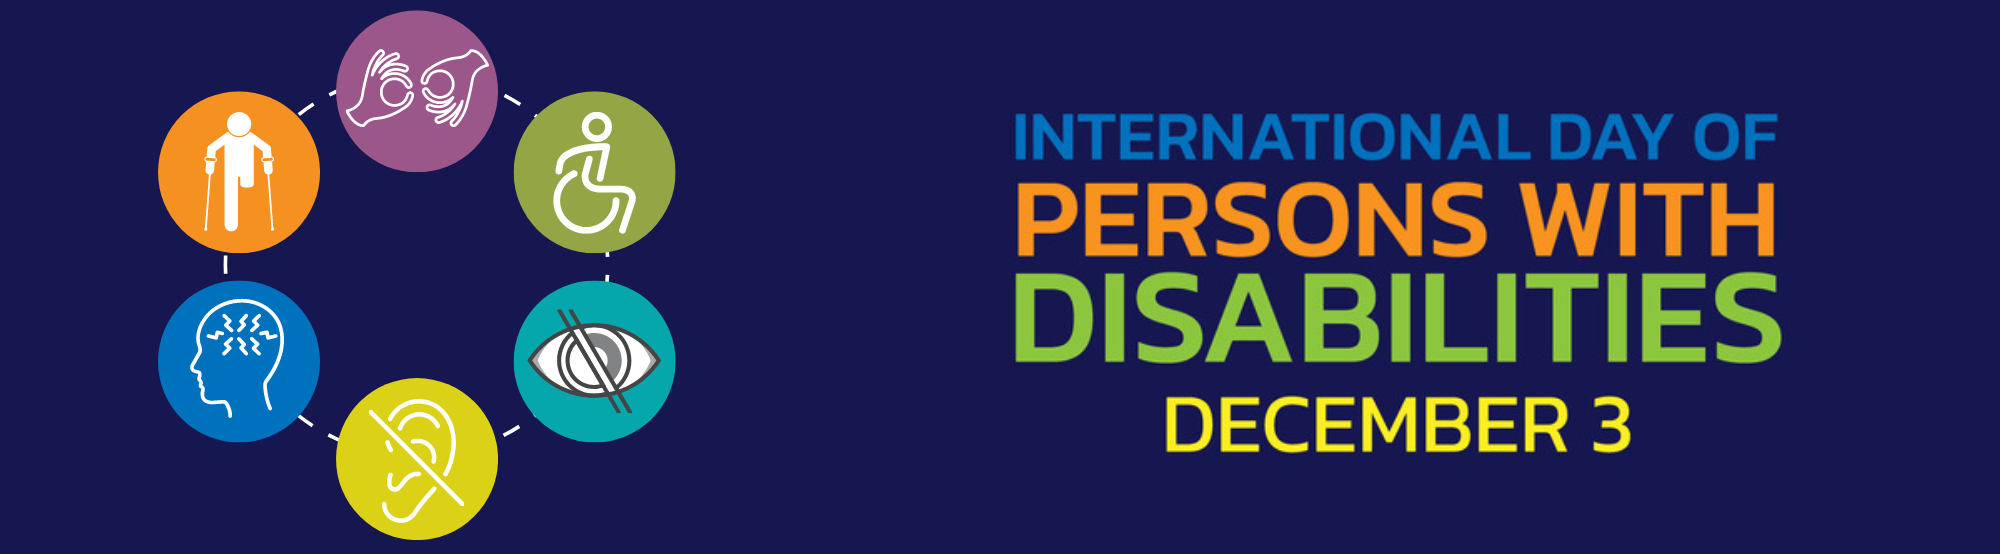 Decorative banner with the text International Day of Persons with Disabilities December 3